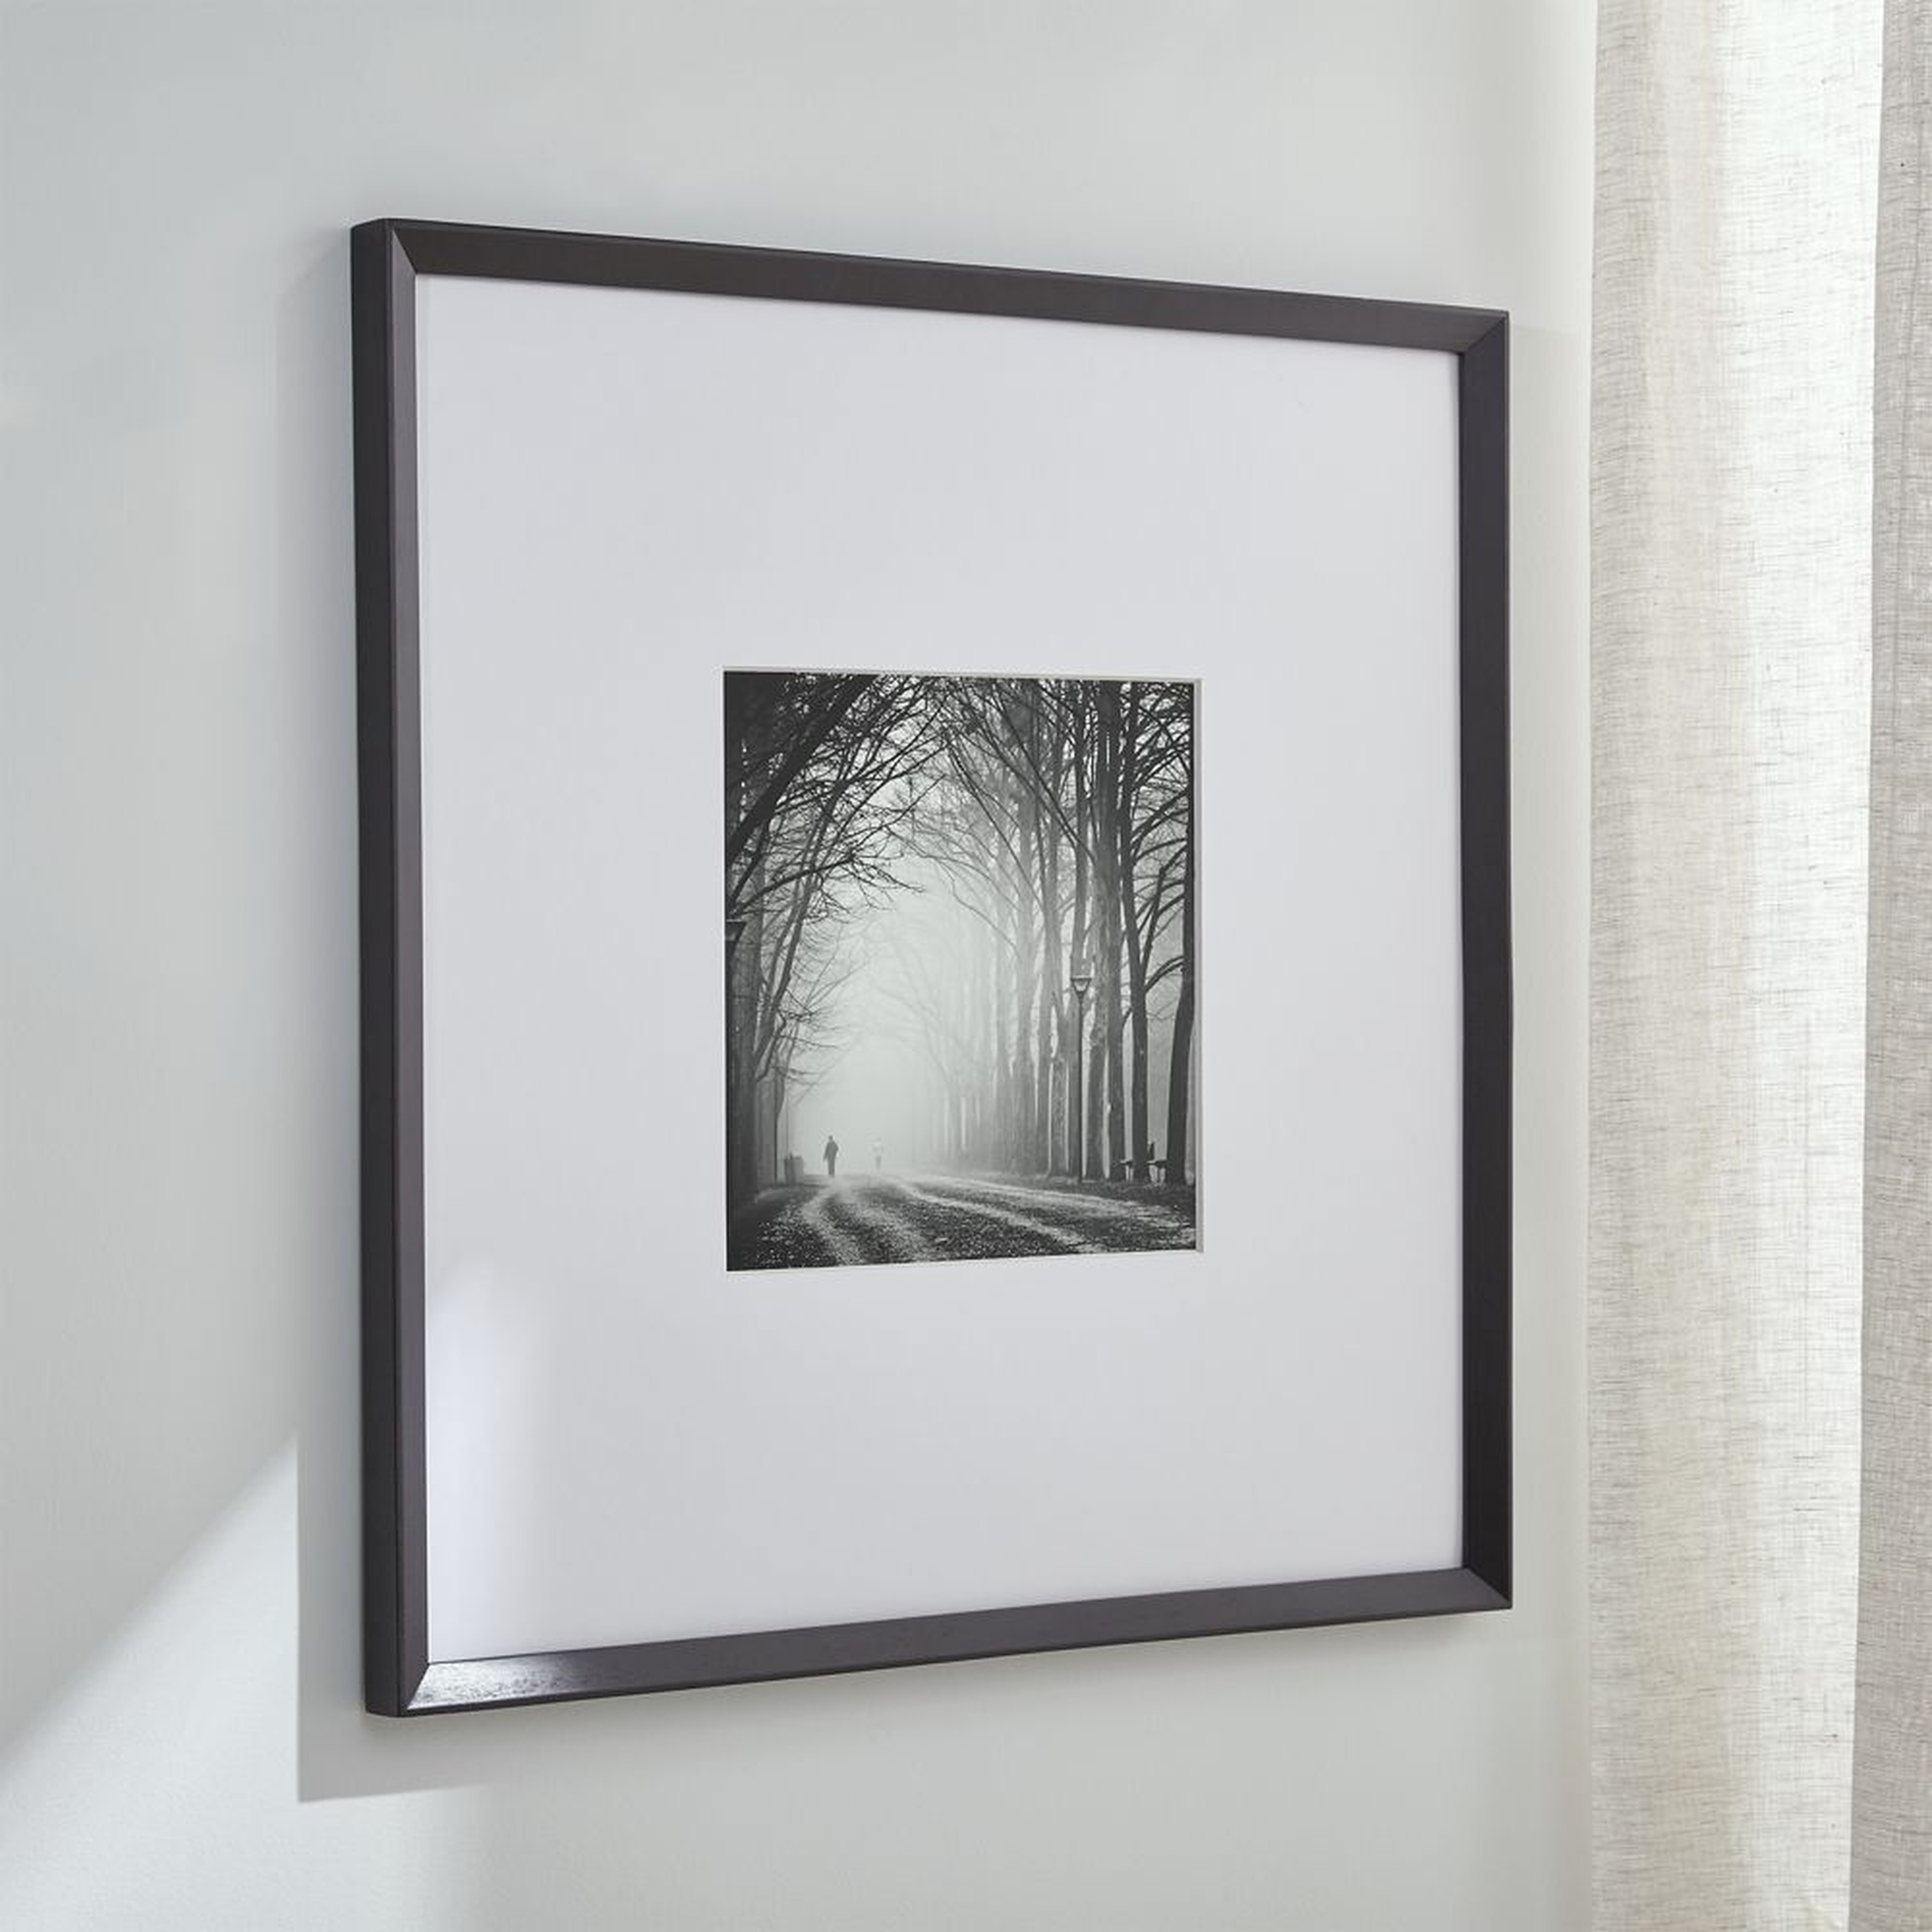 Icon 11x11 Black Picture Frame - Crate and Barrel